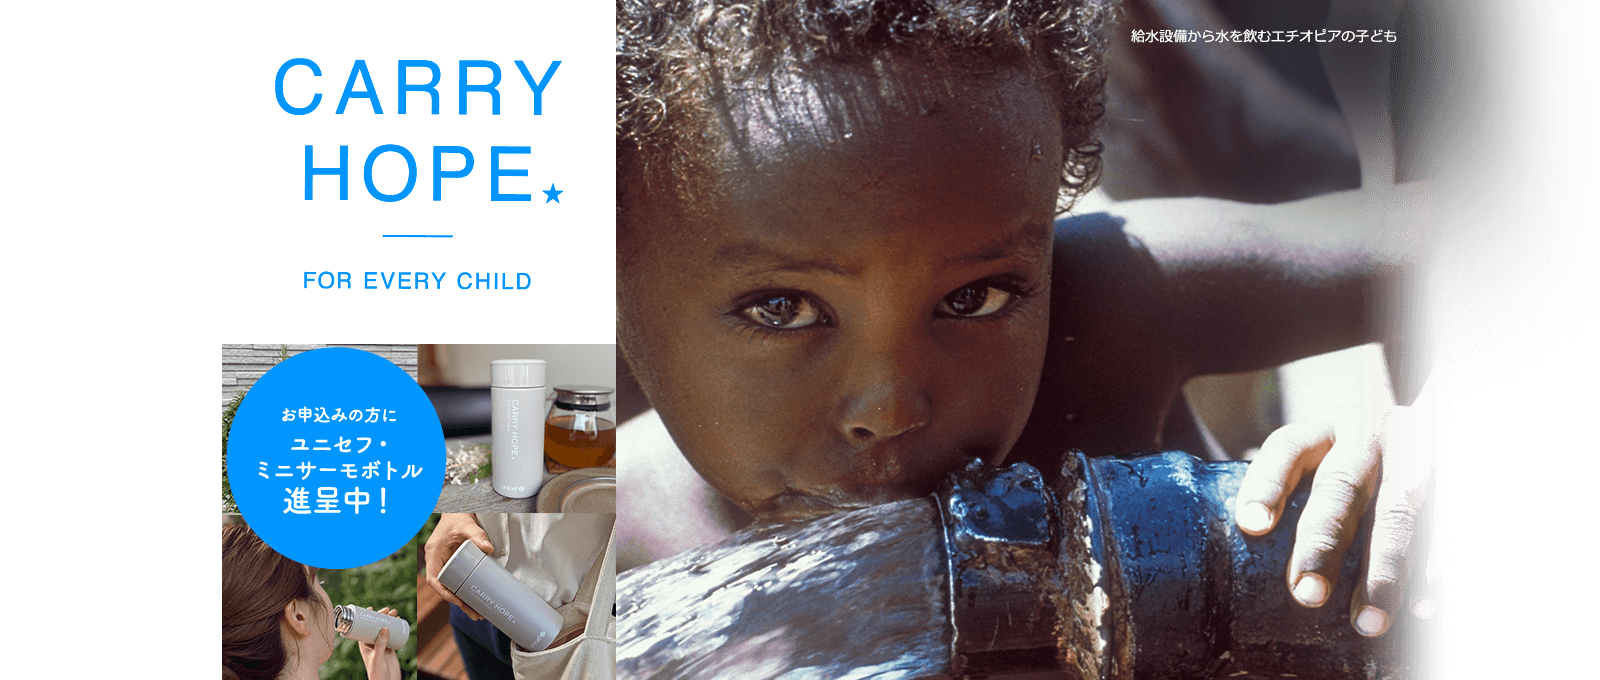 CARRY HOPE★ FOR EVERY CHILD